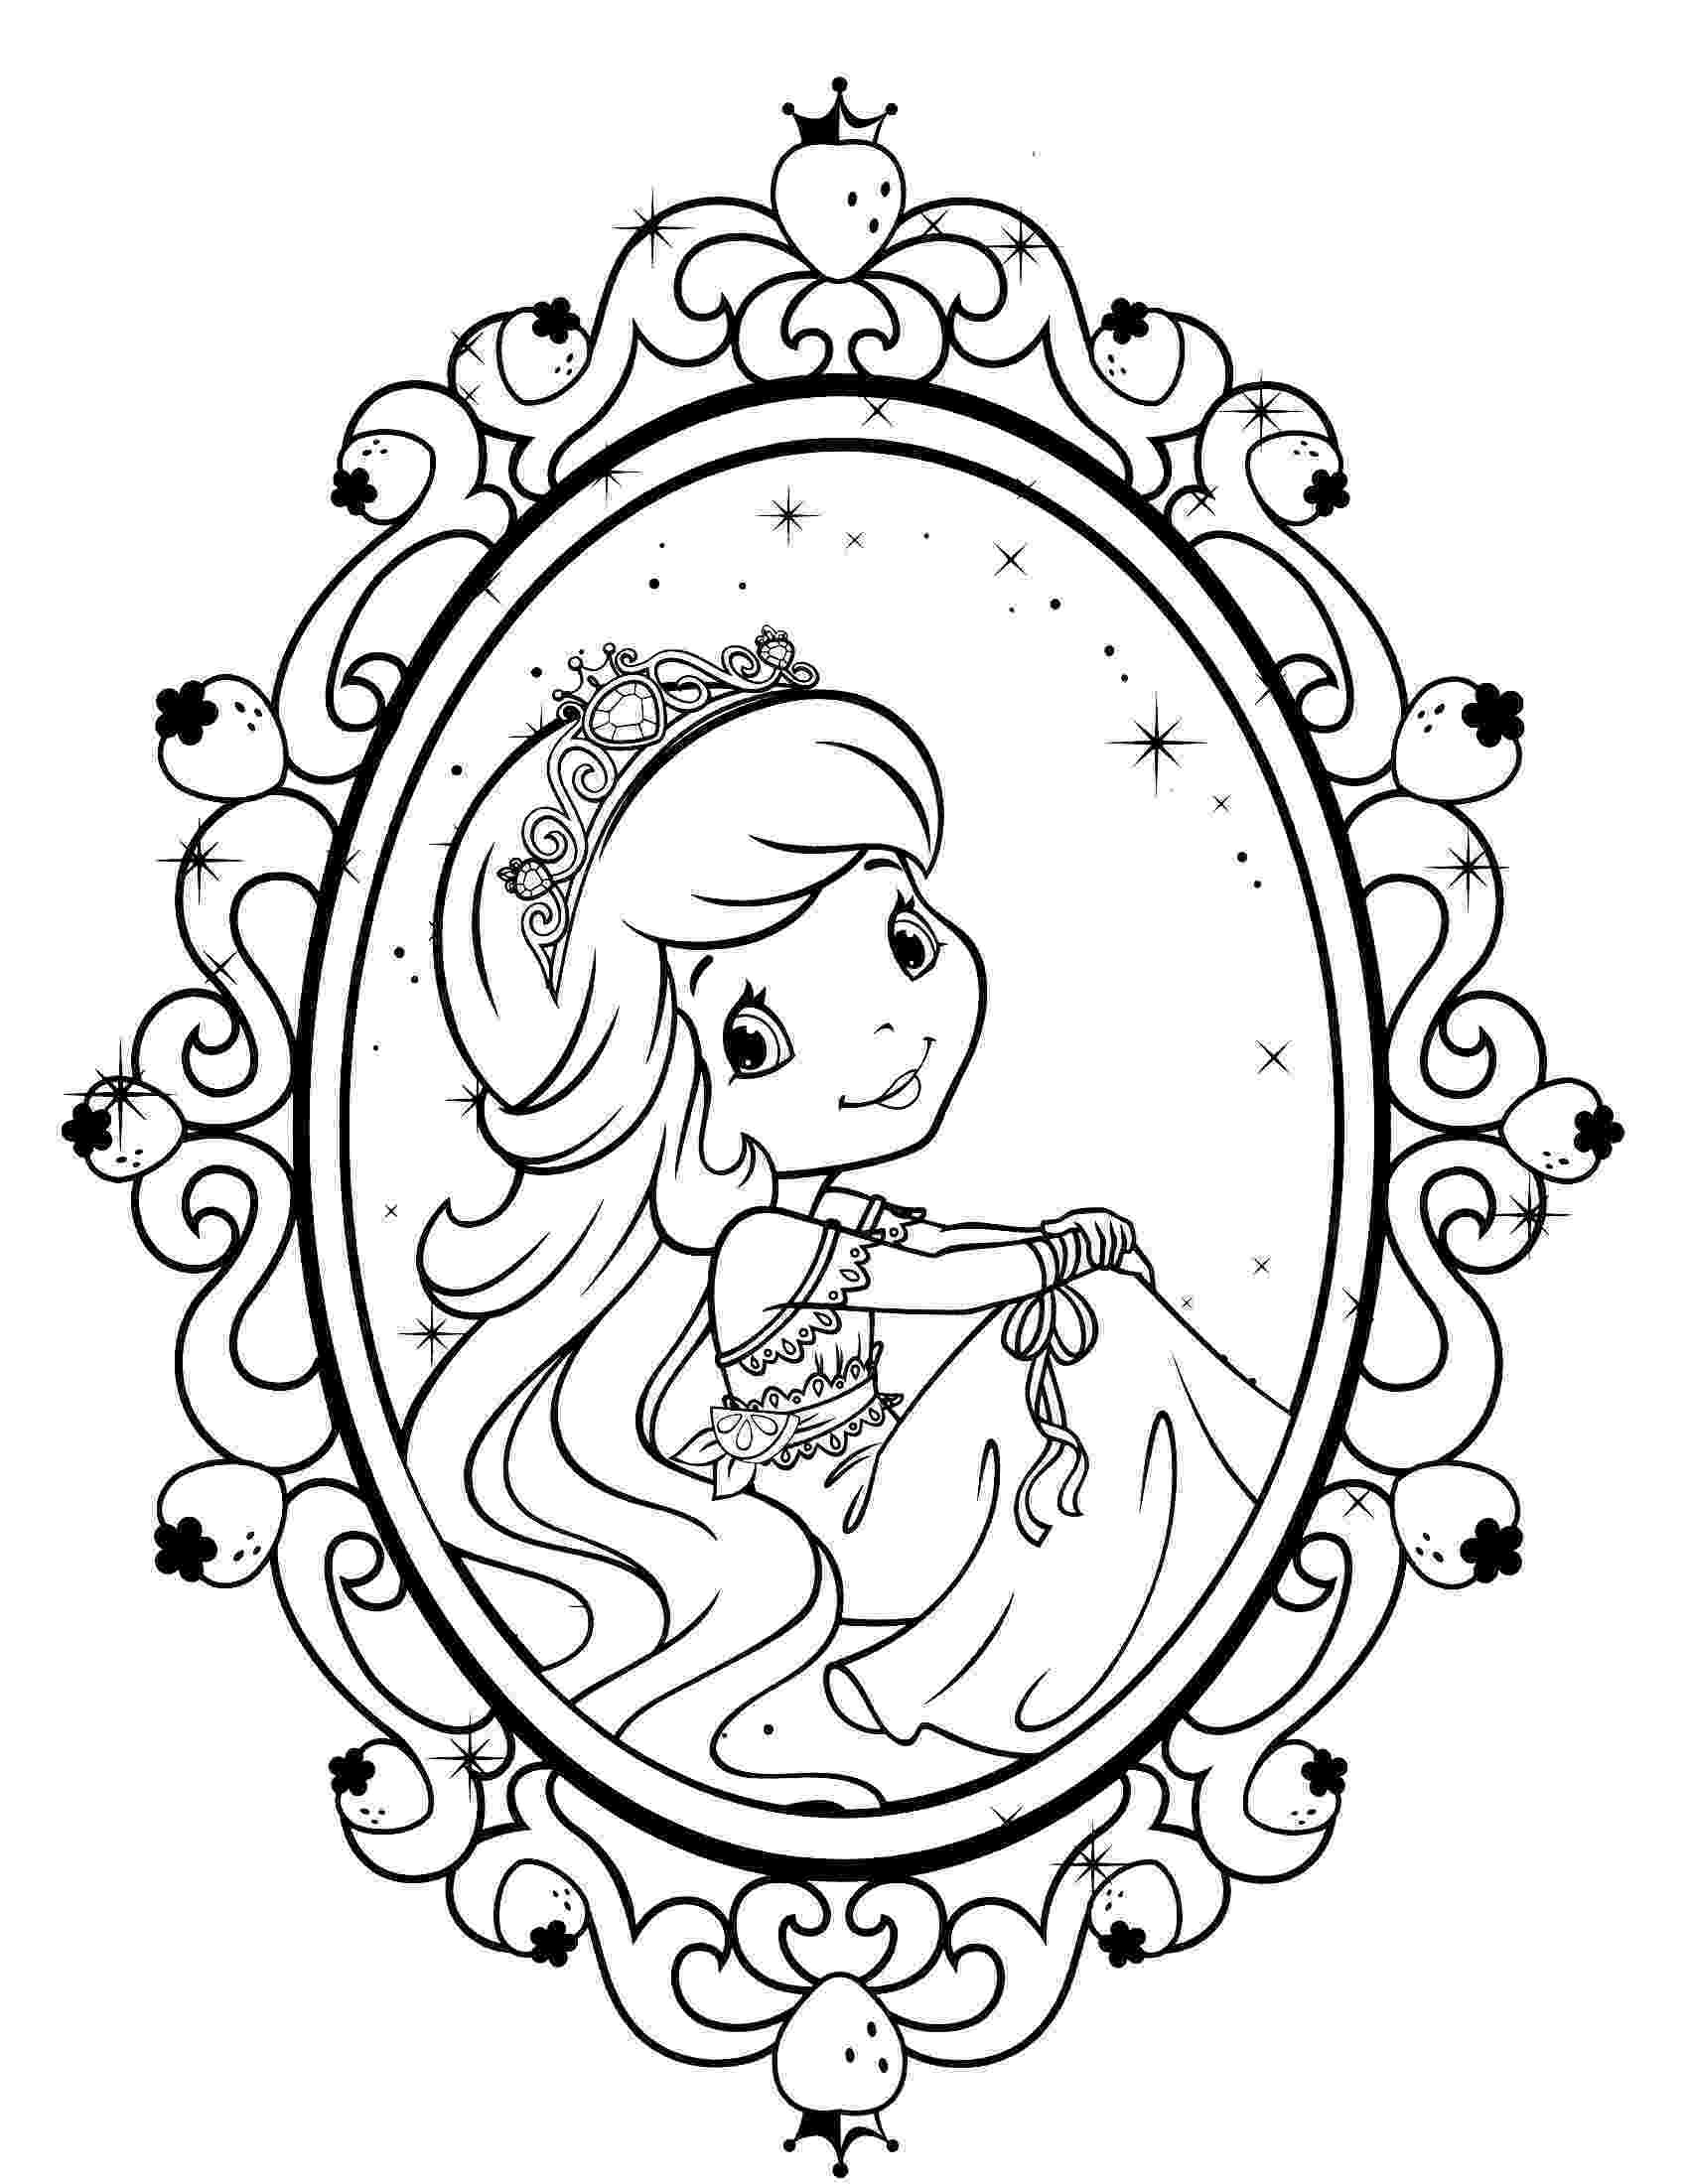 strawberry coloring pages strawberry kiss shopkin coloring page free printable coloring pages strawberry 